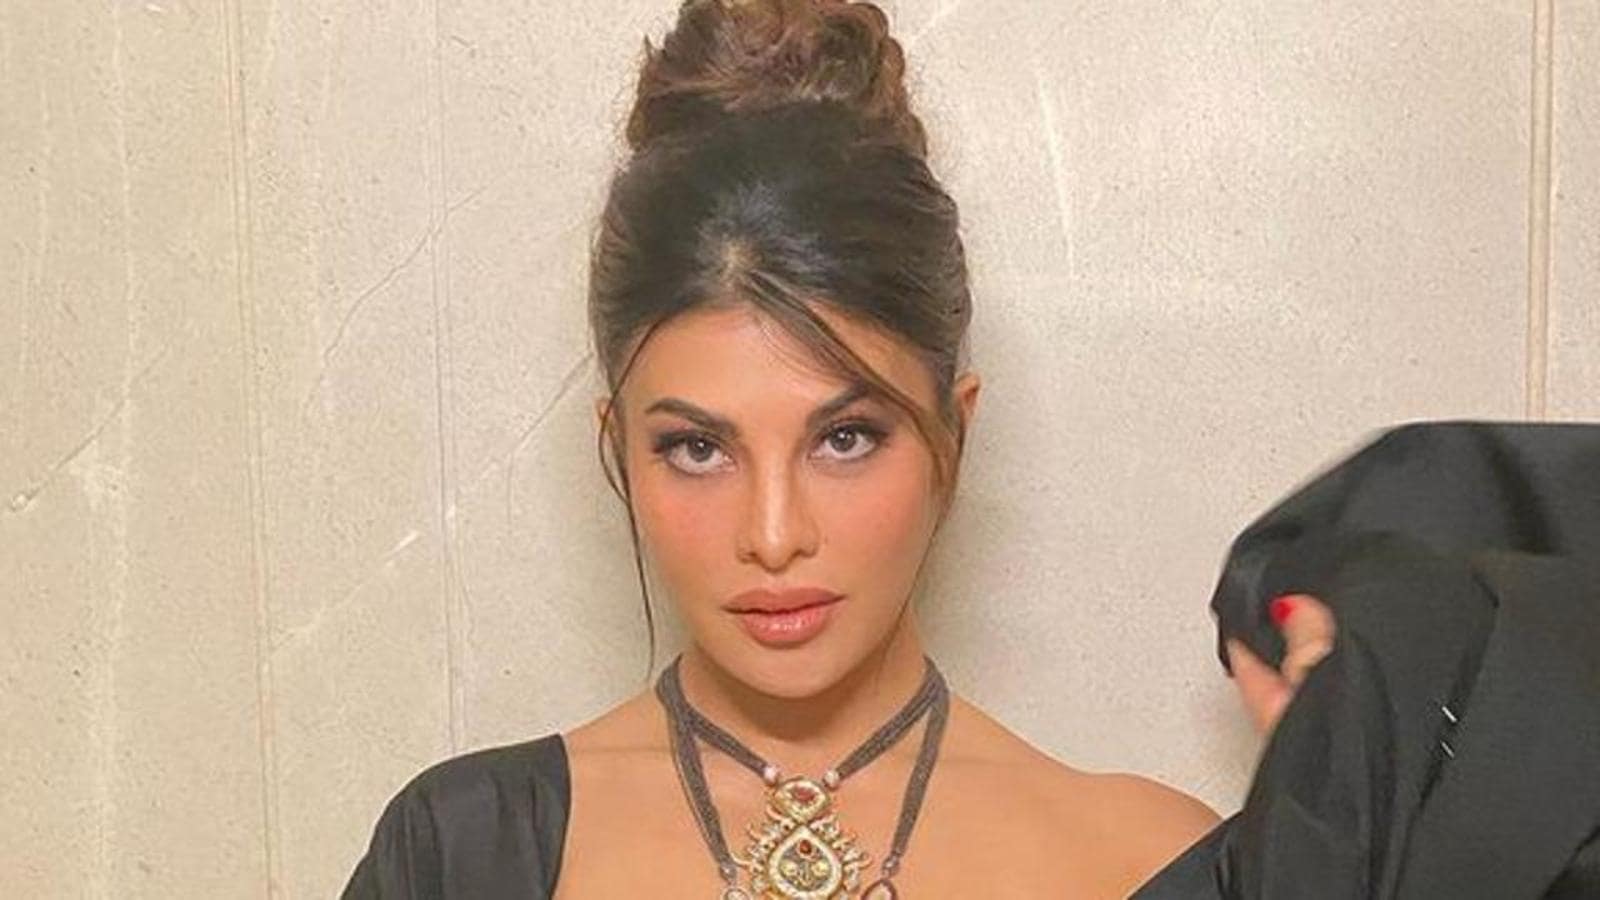 Jacqueline Fernandez on Covid-19 crisis: Breaks my heart to see people  dying due to lack of oxygen